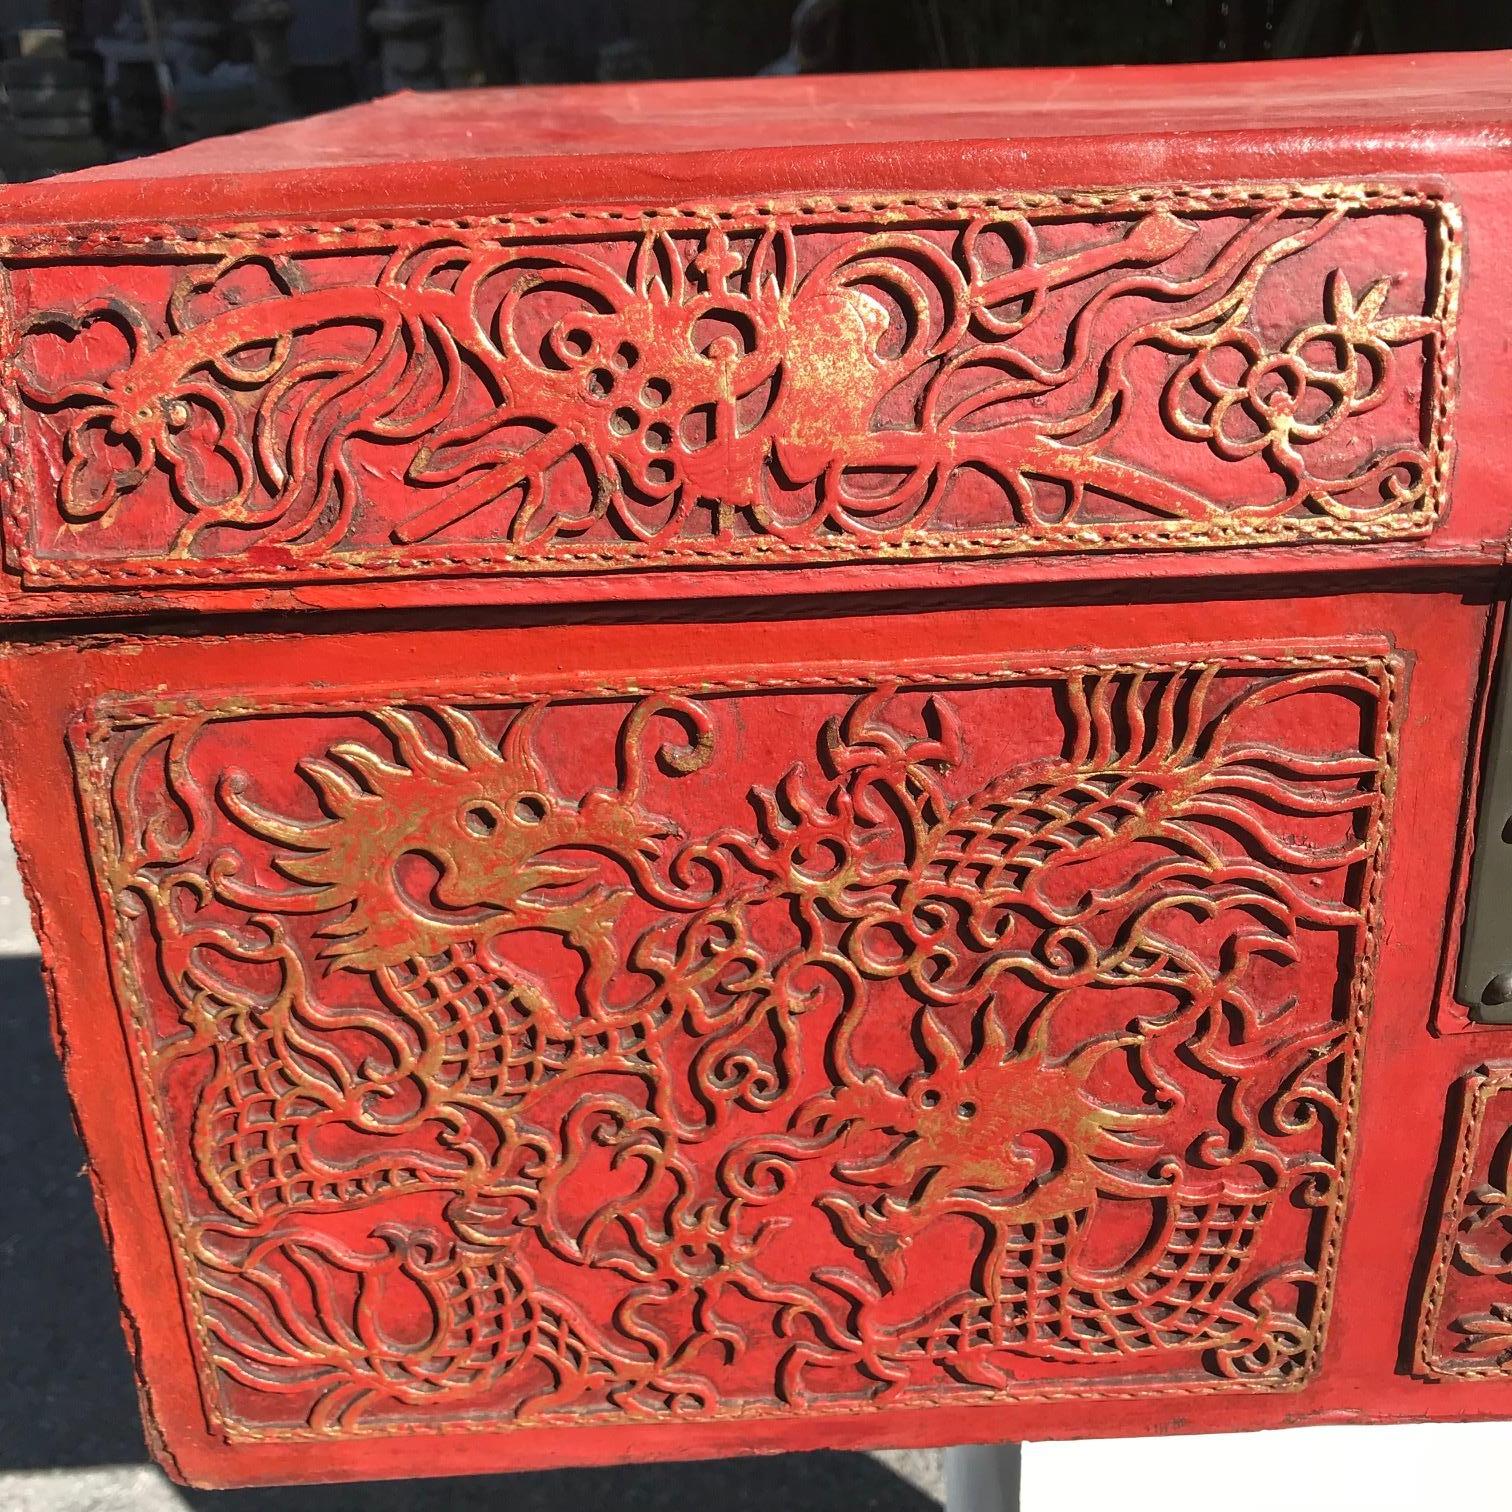 Hand-Crafted Chinese Antique Brilliant Red Lucky Leather Storage Trunk, Qing Dynasty